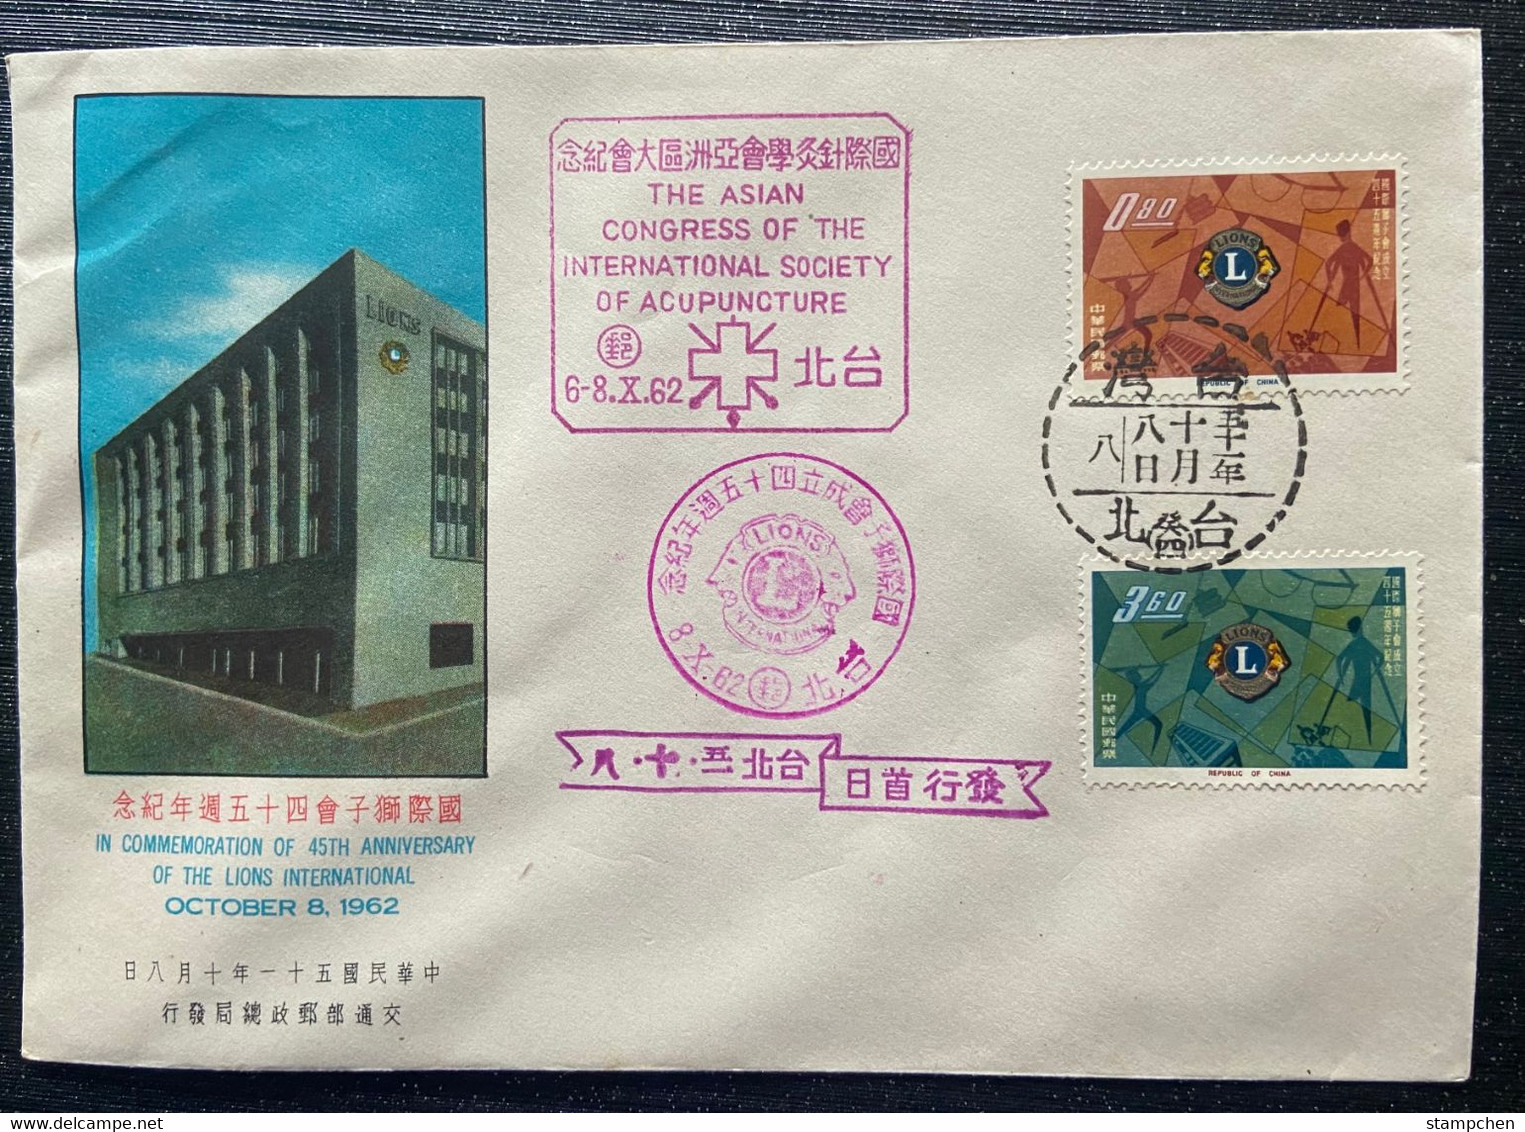 FDC - FDC Taiwan 1962 45th Anni Lions International Stamps emblem disabled  glasses